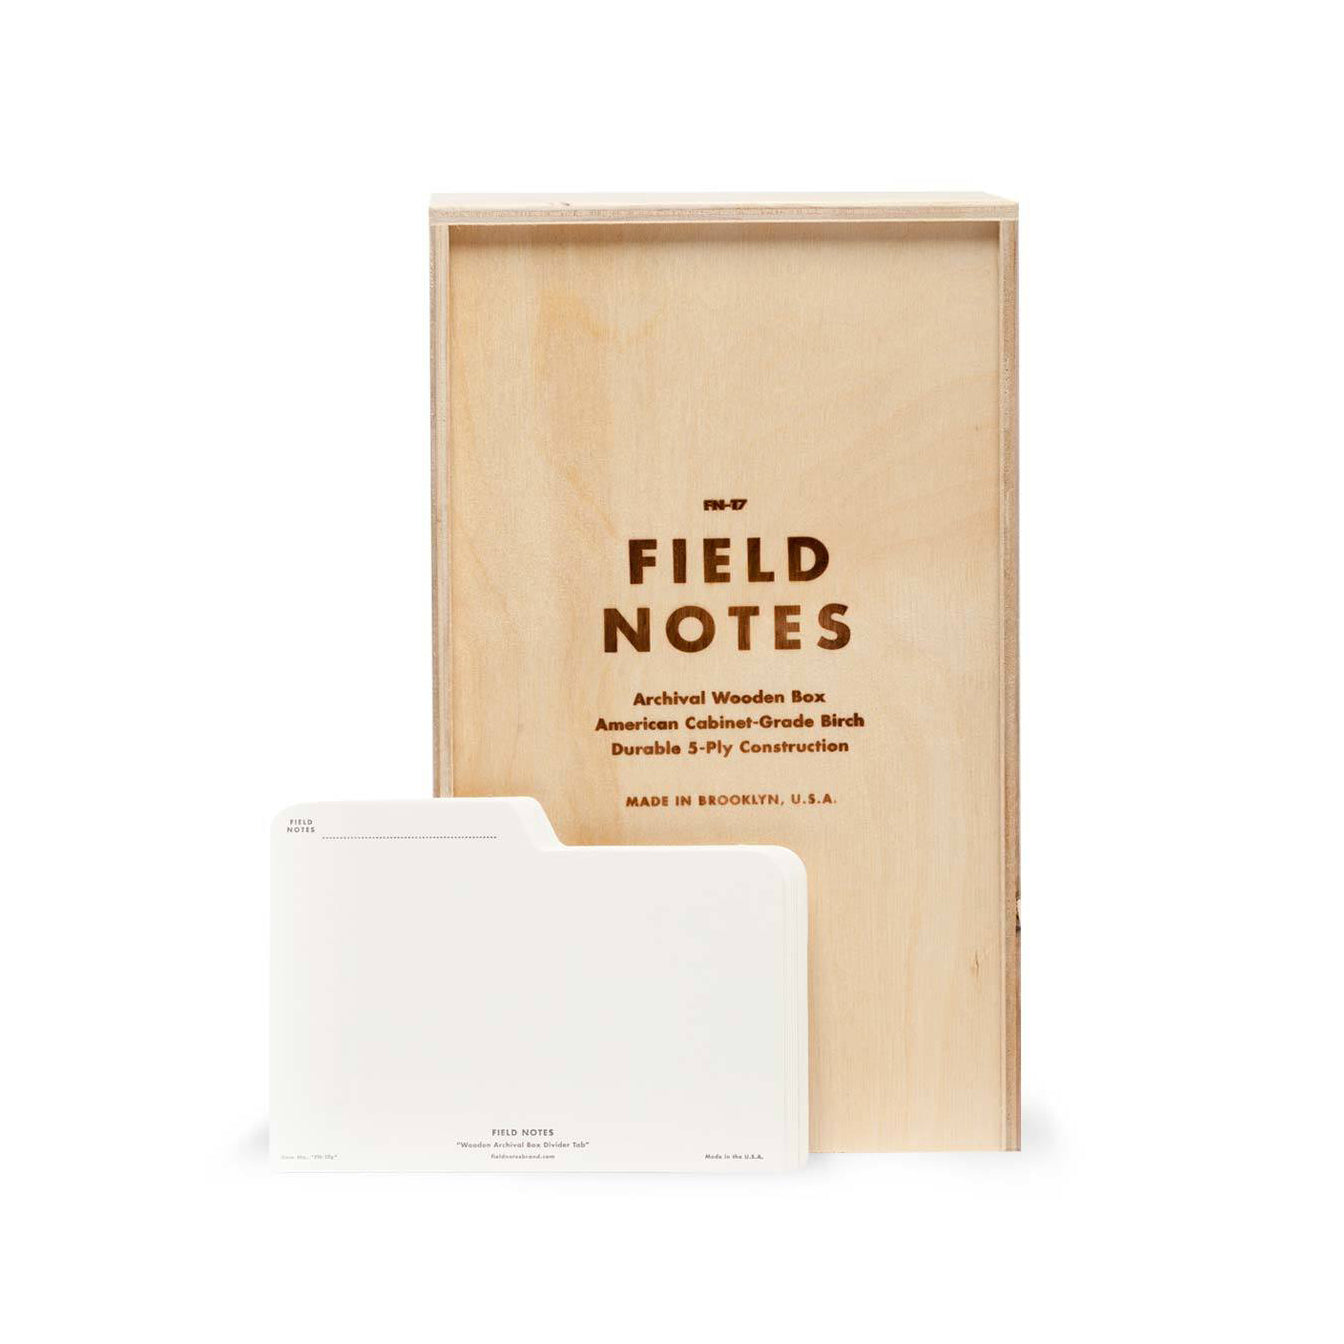 FIELD NOTES Archival Wooden Box FN-17 Default Title